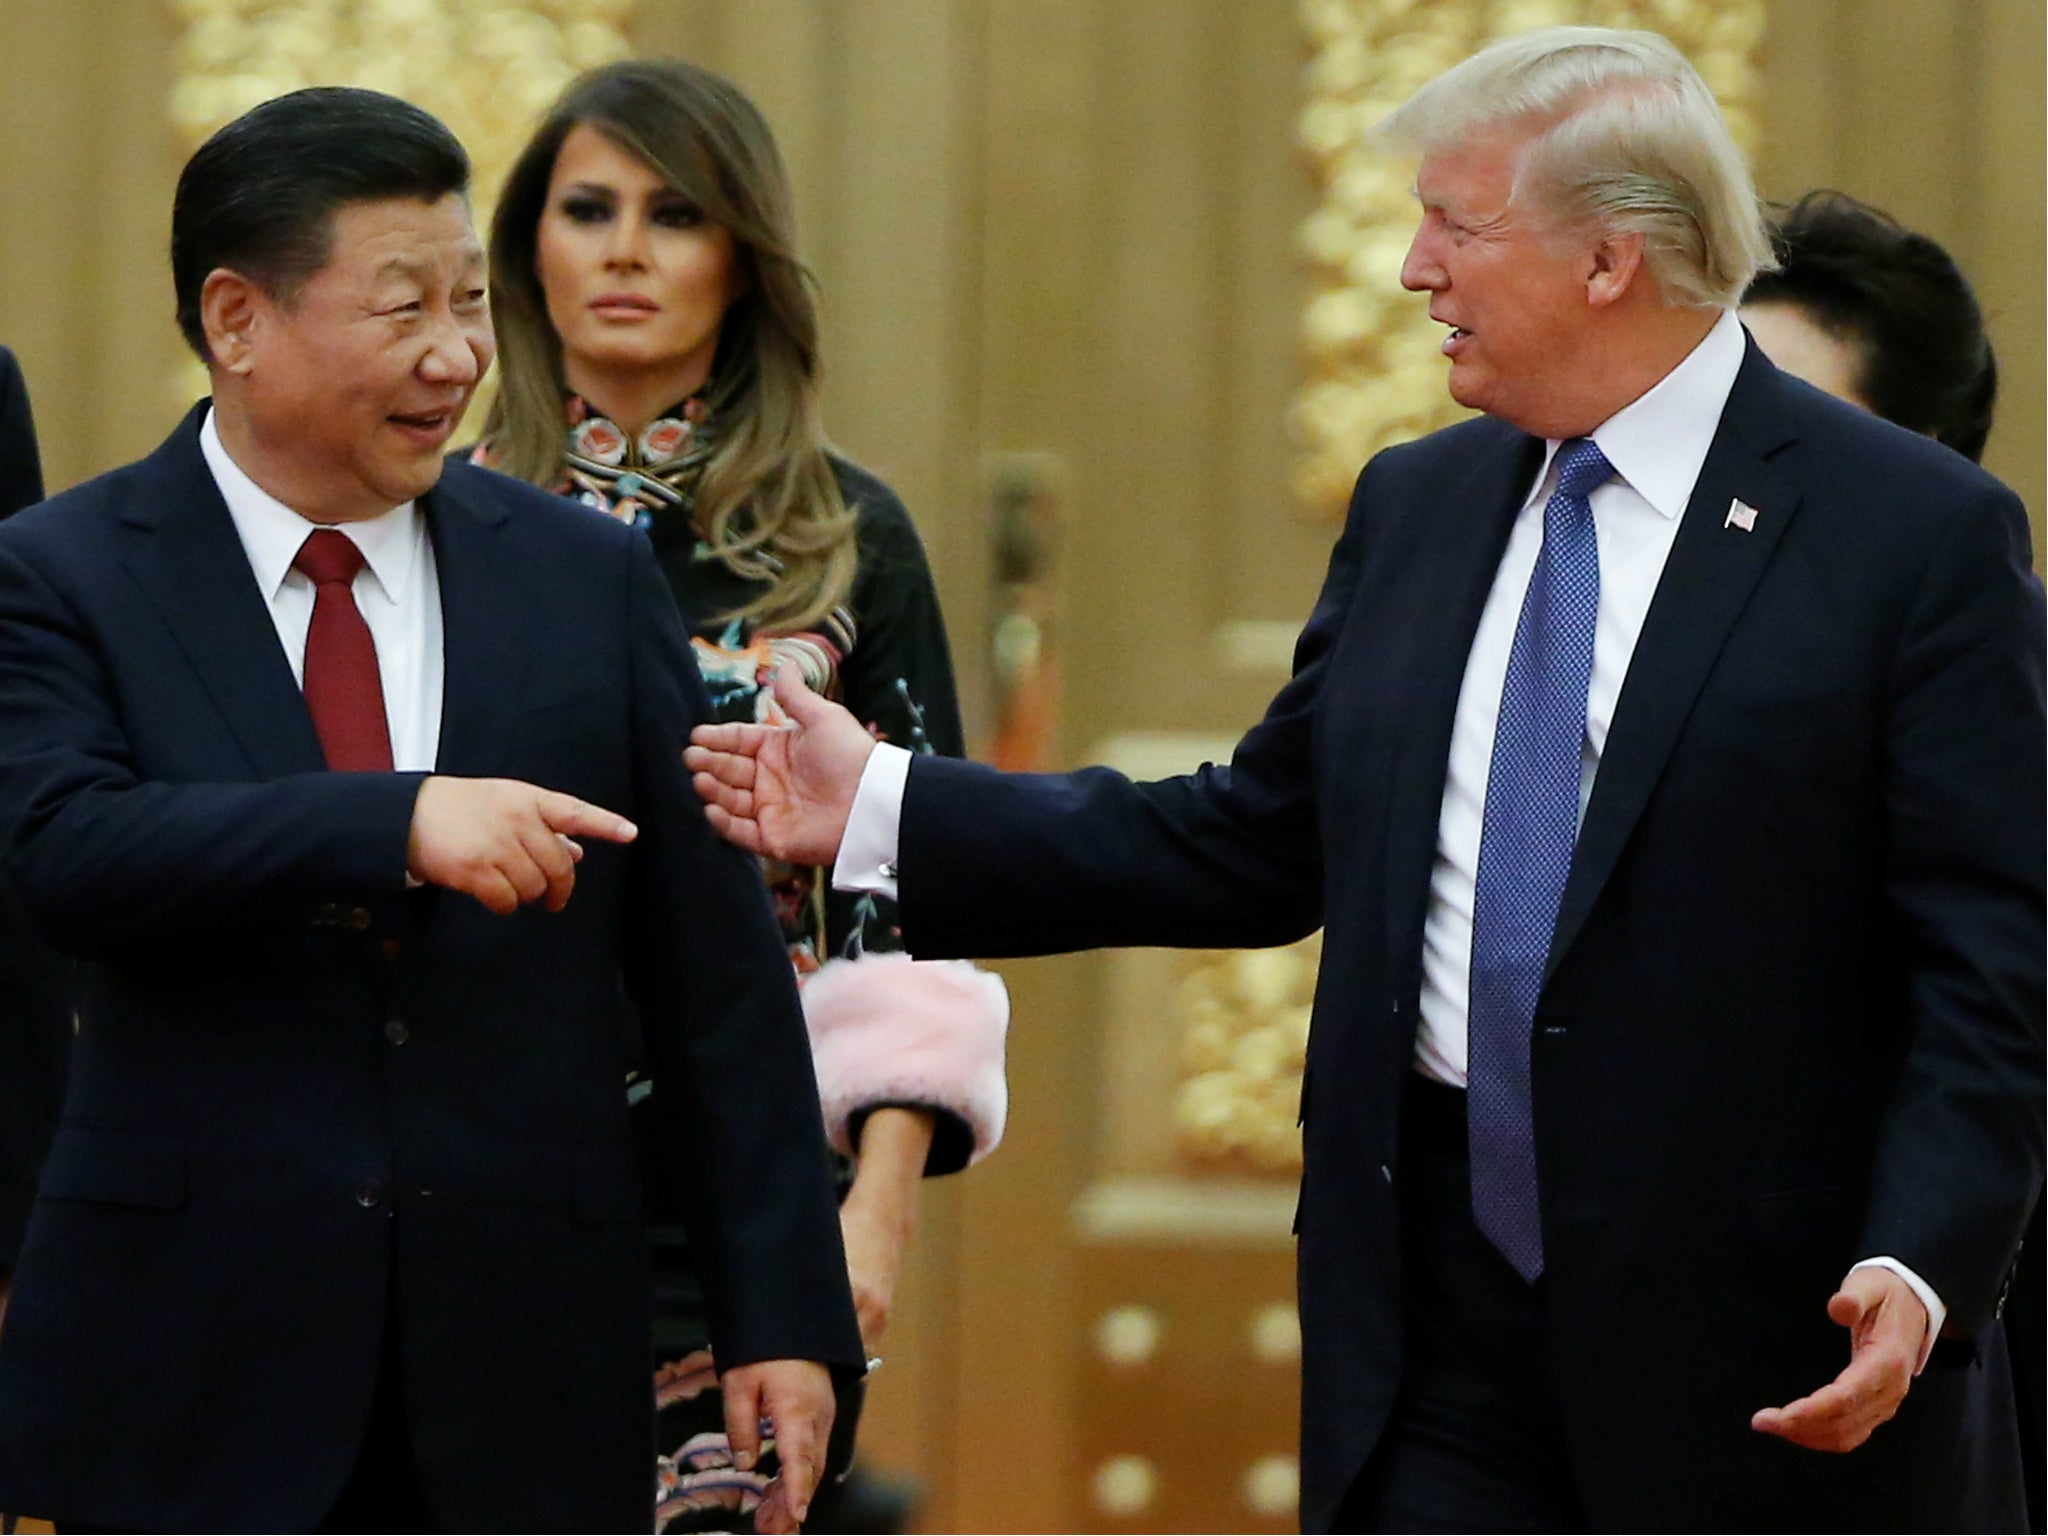 US President Donald Trump and China's President Xi Jinping in Beijing, China, 9 November 2017.